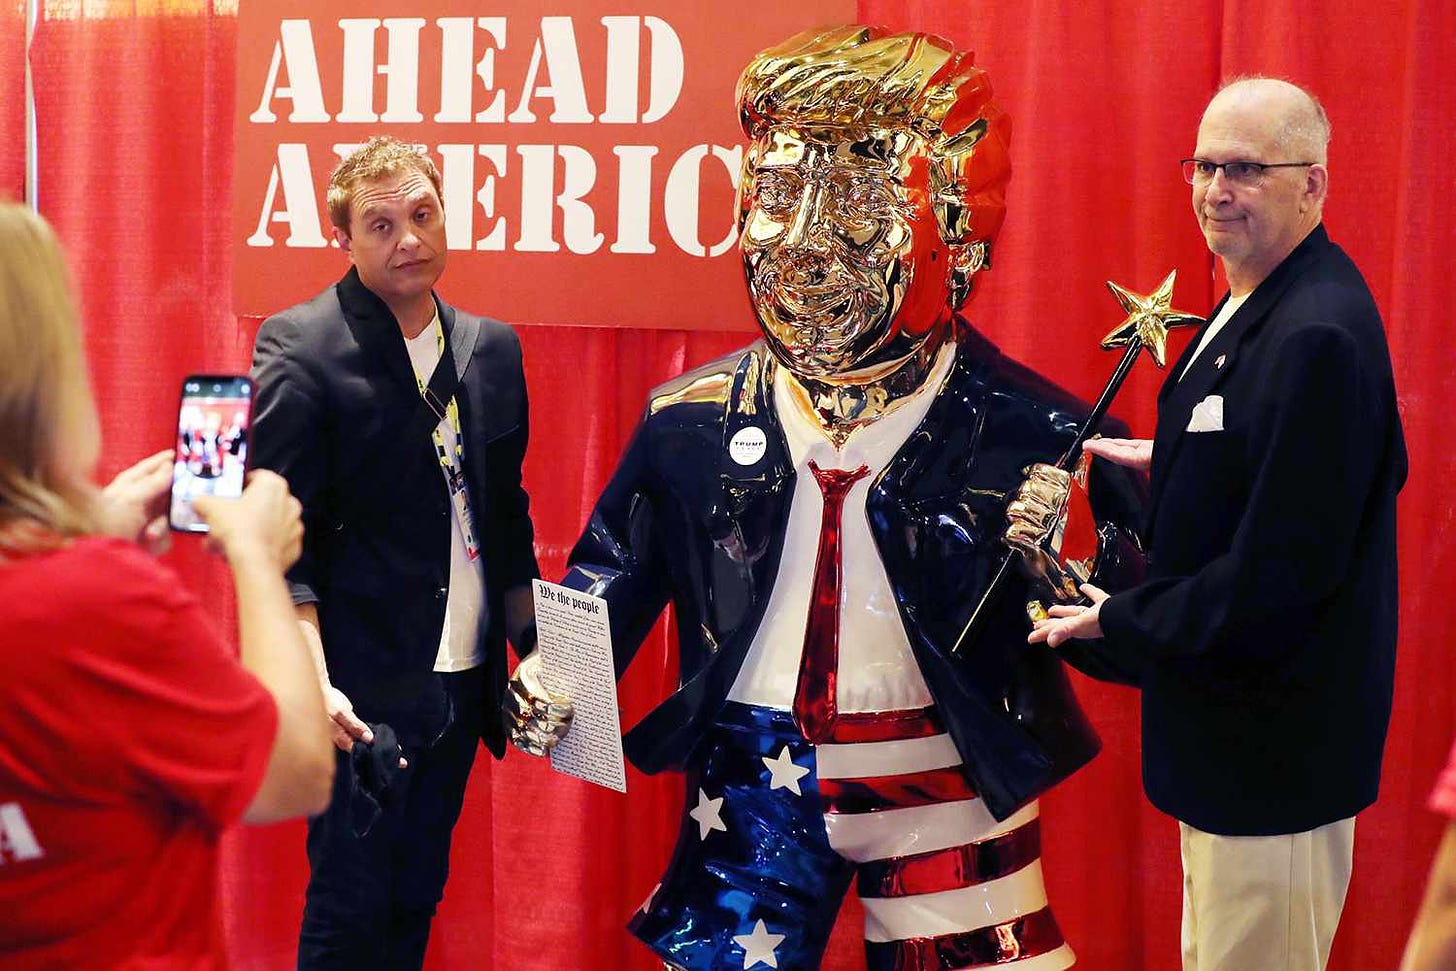 Donald Trump Golden Statue Is at CPAC